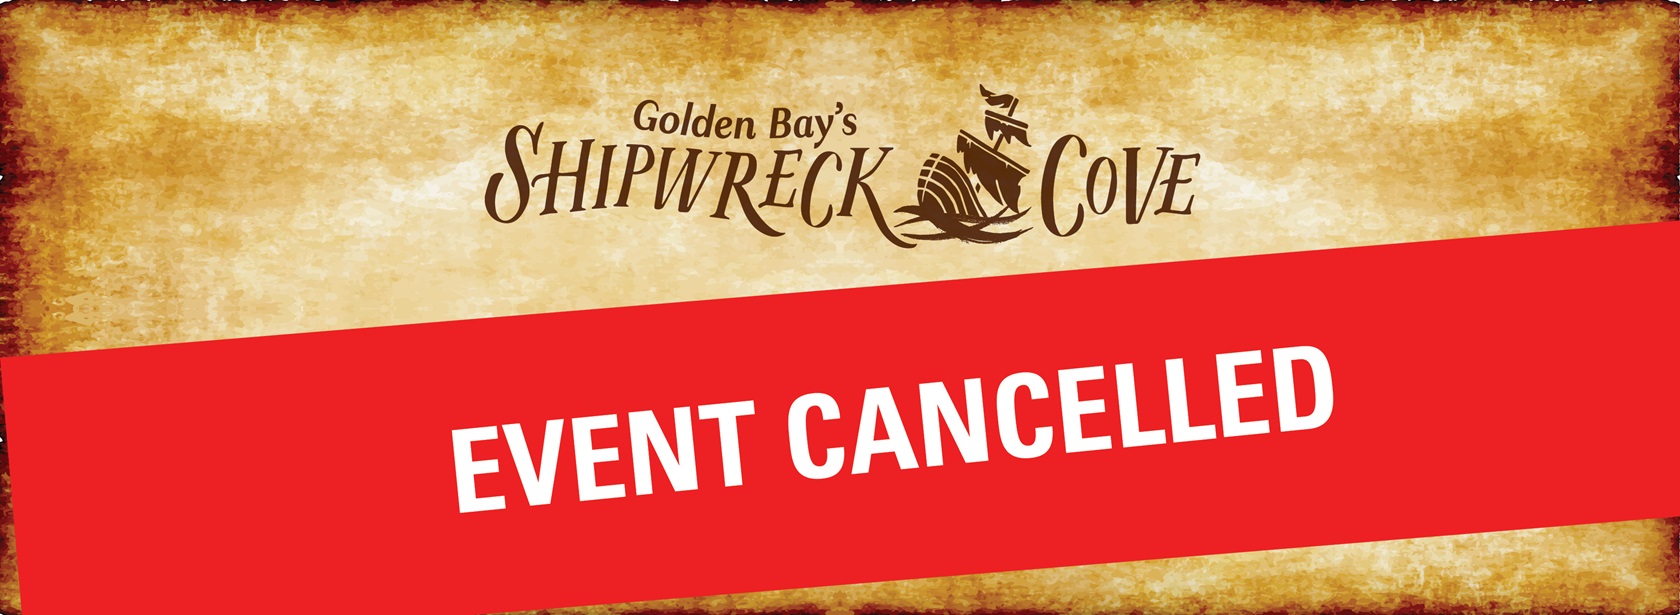 Golden Bay - Shipwreck Cove Cancelled